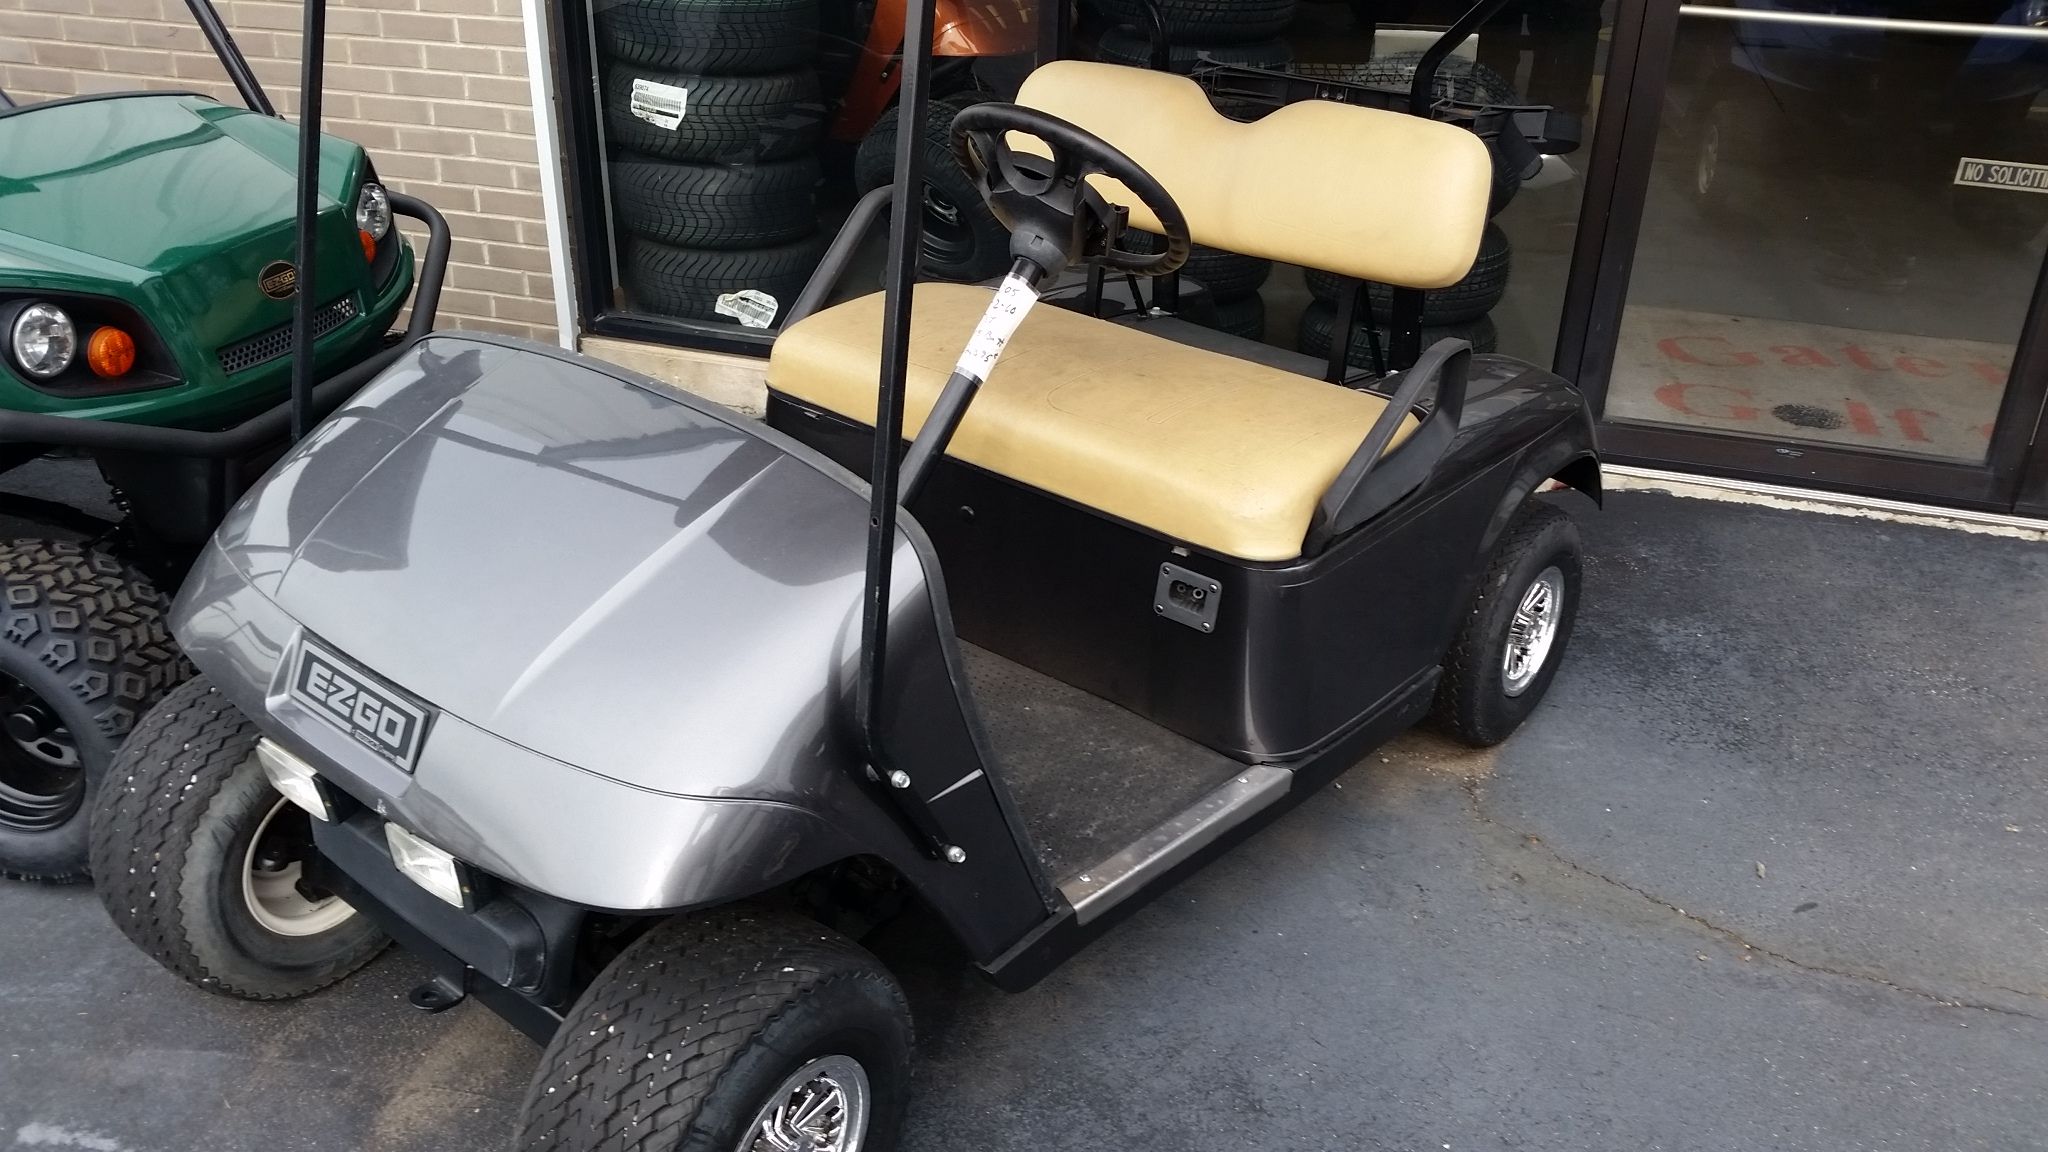 Services & Products Gateway Golf Cars Ltd in O'Fallon MO